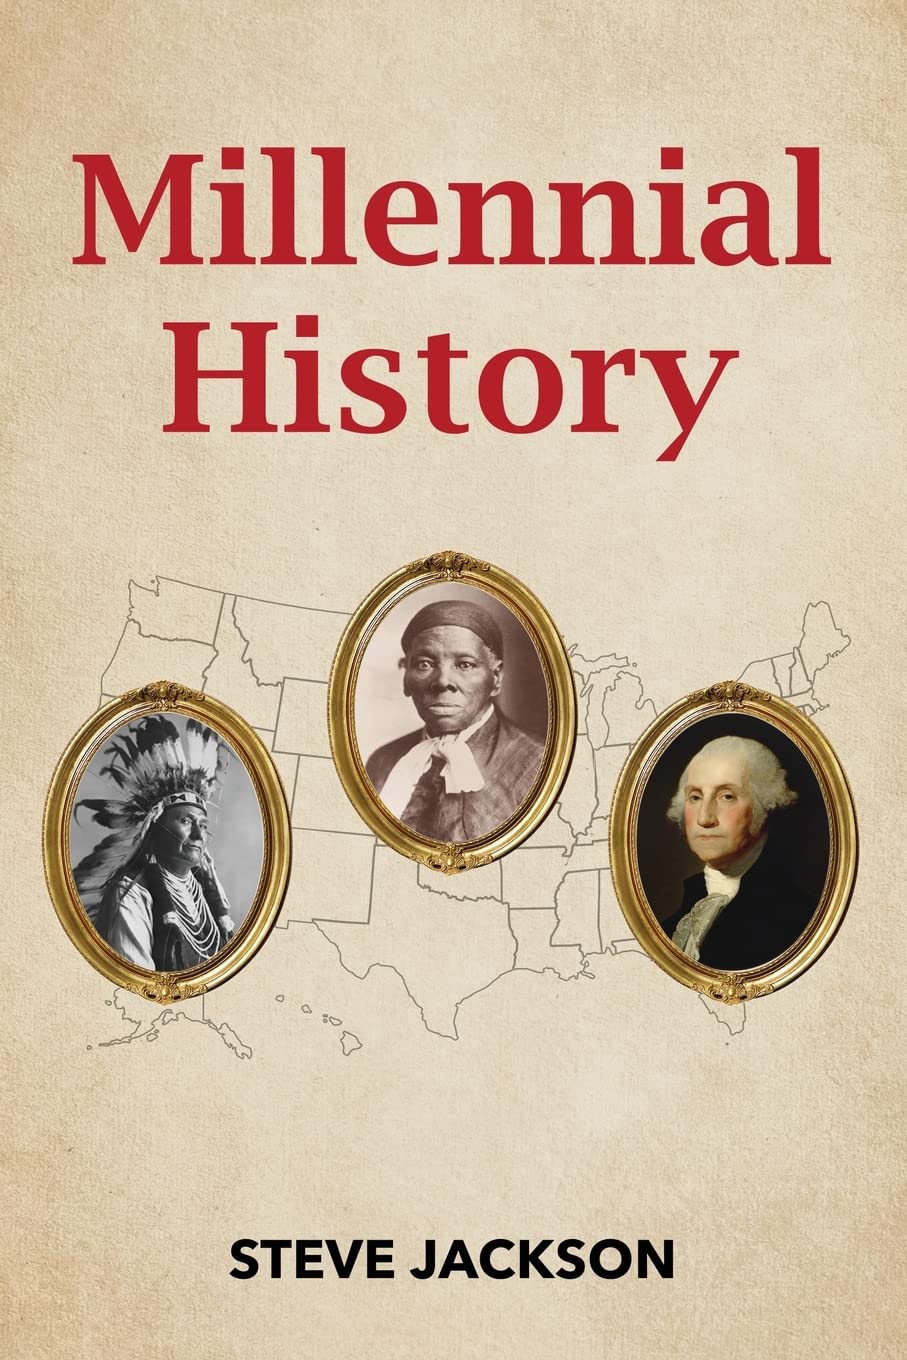 The front cover of Millennial History by Steve Jackson